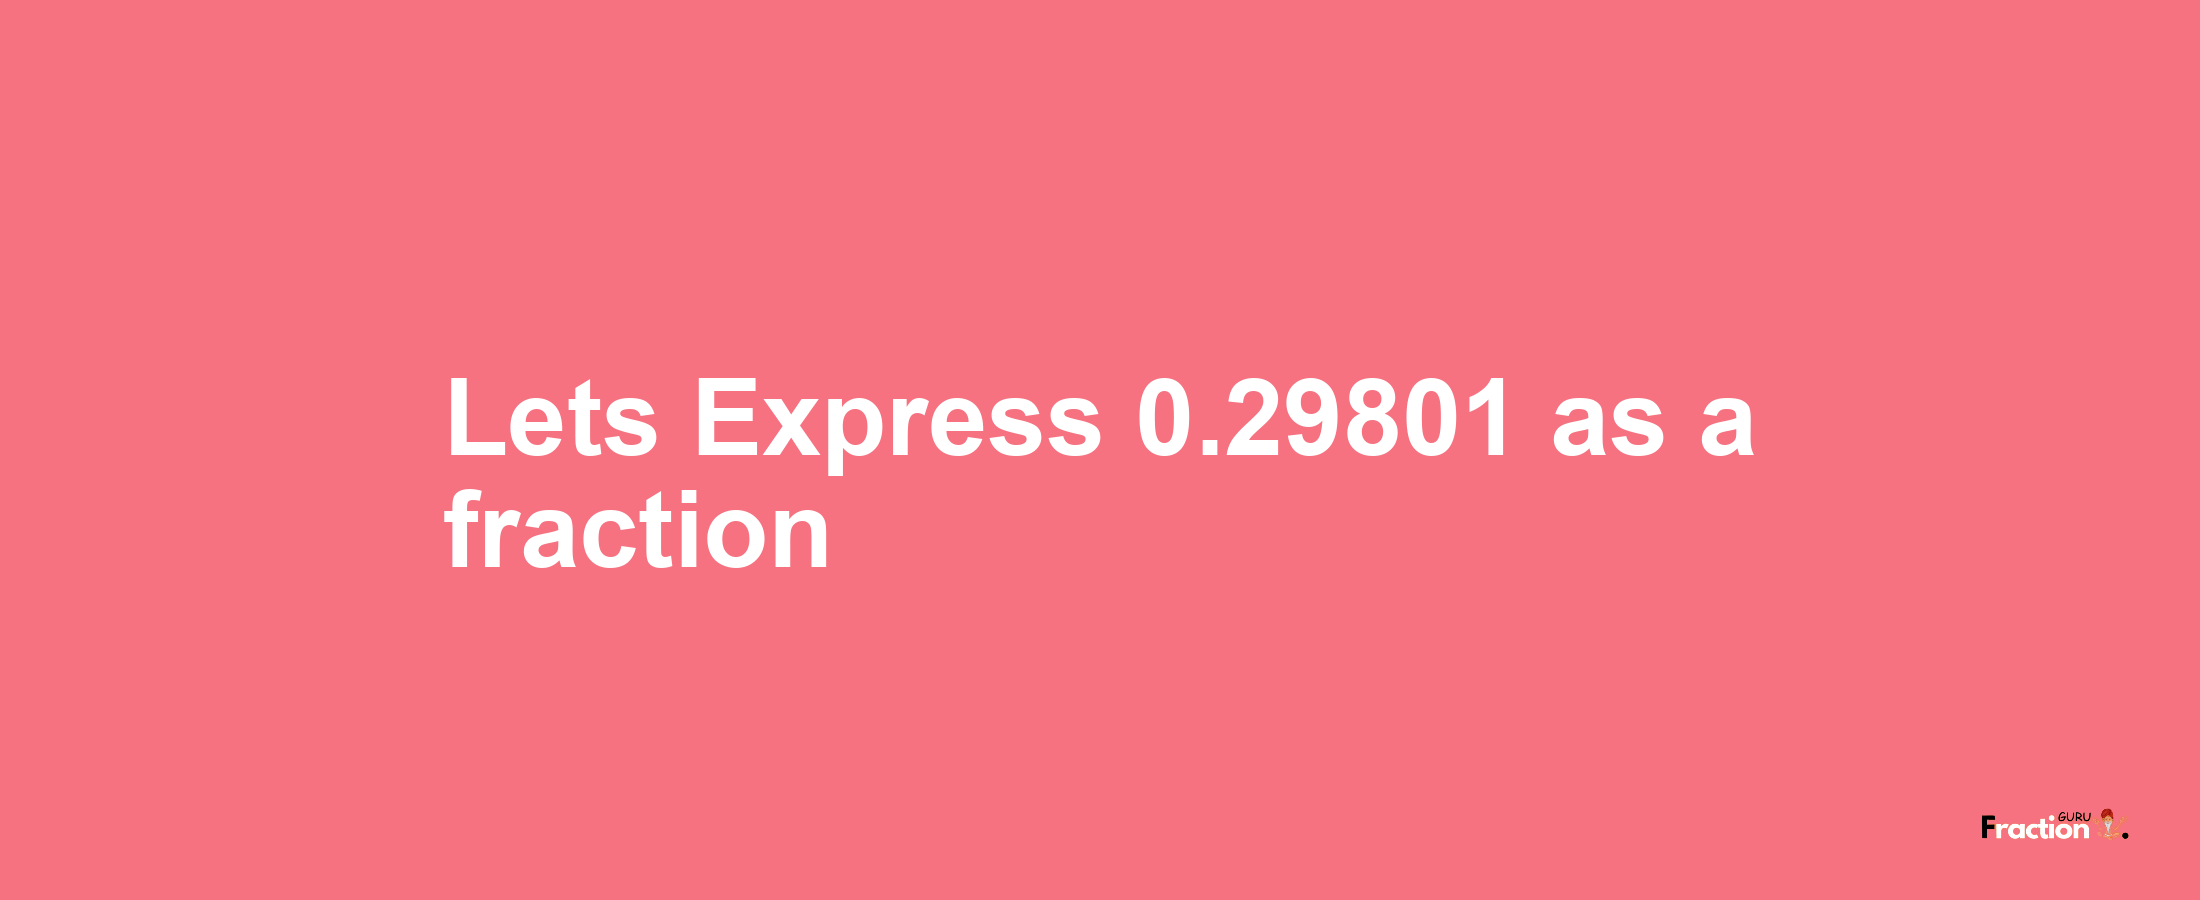 Lets Express 0.29801 as afraction